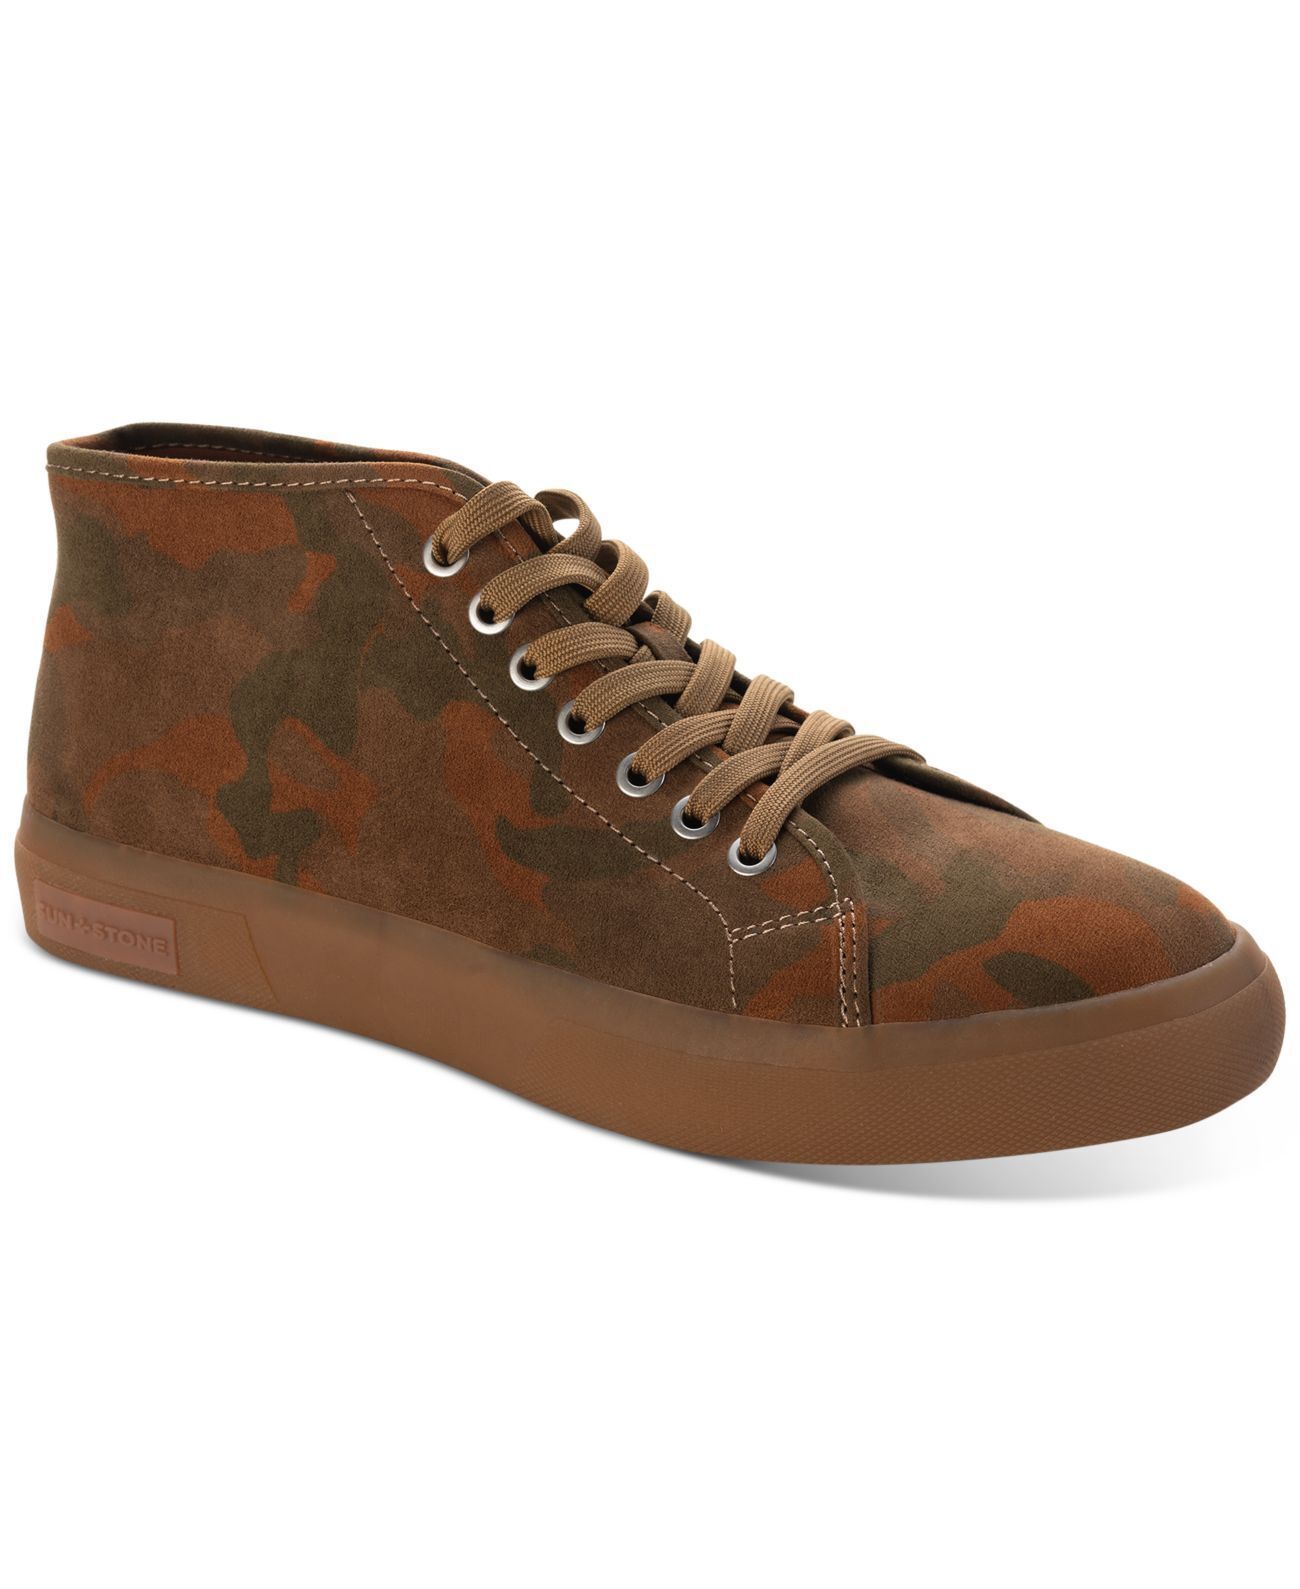 Primary image for Sun + Stone Mens Nolan Mid-Hight Boots,Camo,8.5 M